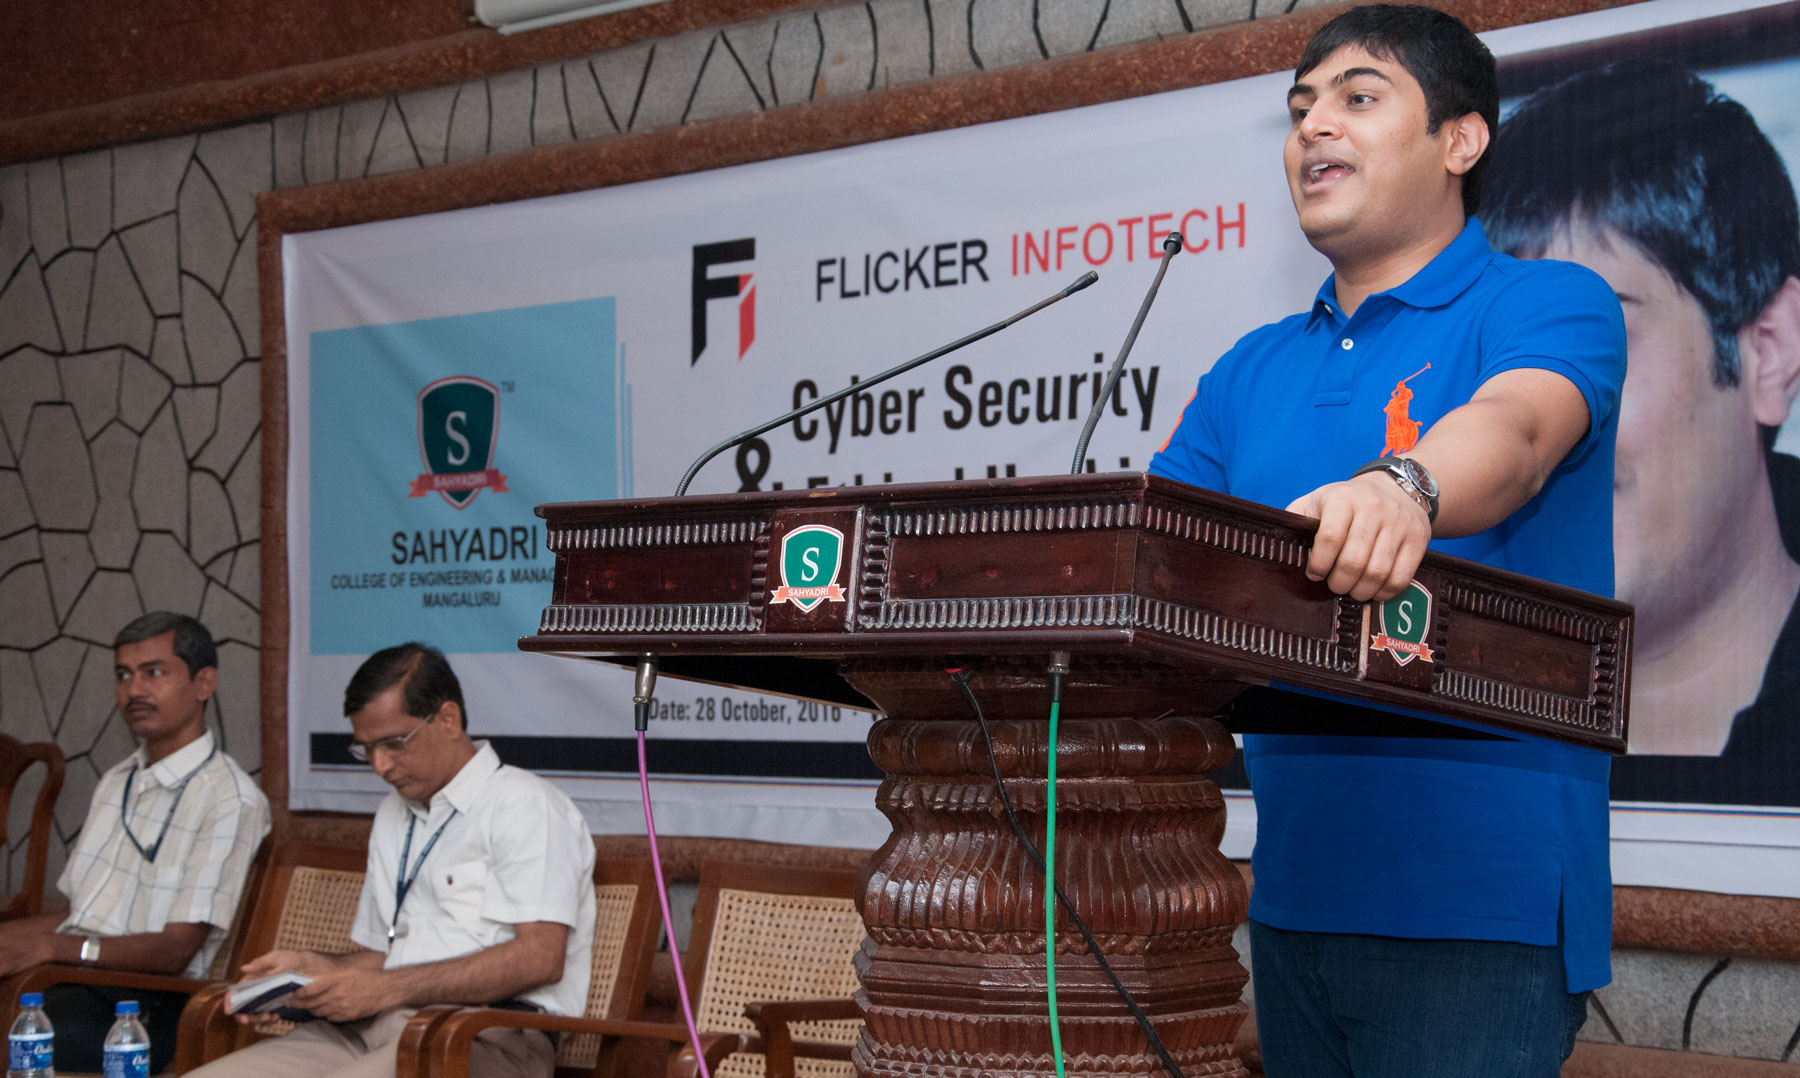 Flicker Infotech organizes a Workshop on Ethical Hacking facilitated by Ankit Fadia